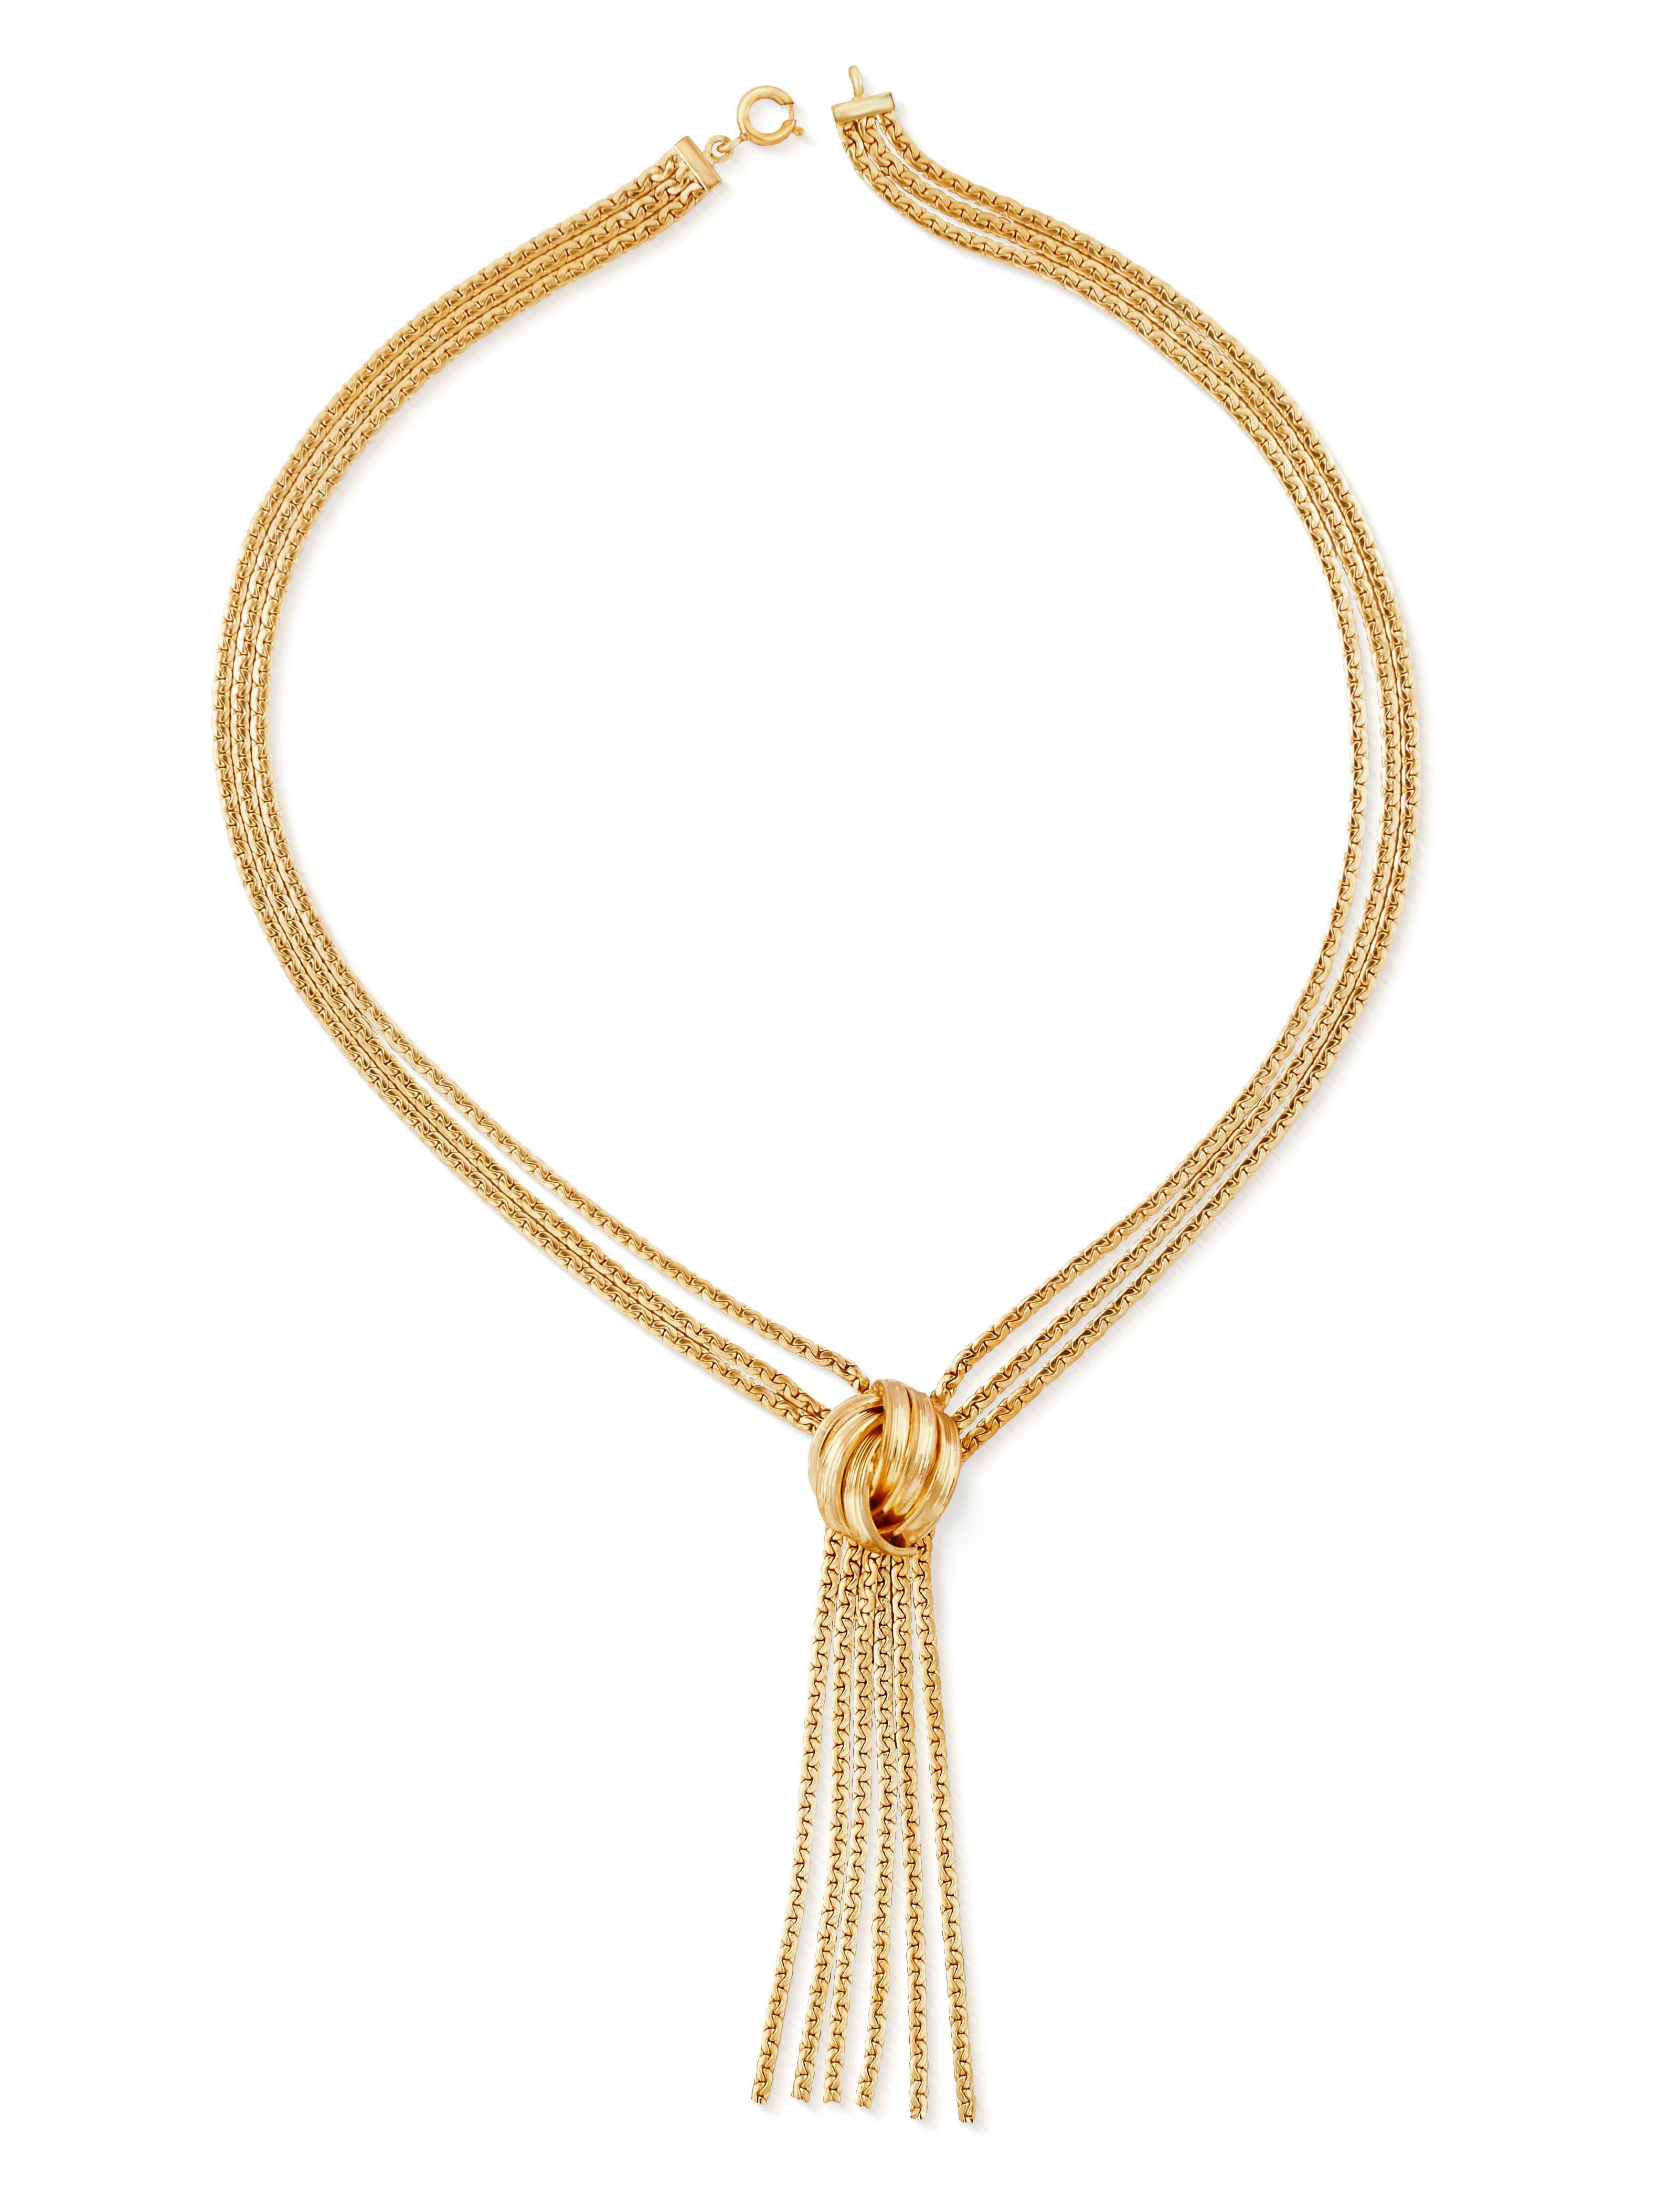 Vintage 1962 Grosse multi-chain tassel necklace in gold plate.  This elegant heritage necklace comprises three separate chains draped on each side and pulled together by a decorative knot to form a tassel.  The necklace sits on the neck at a 16 inch